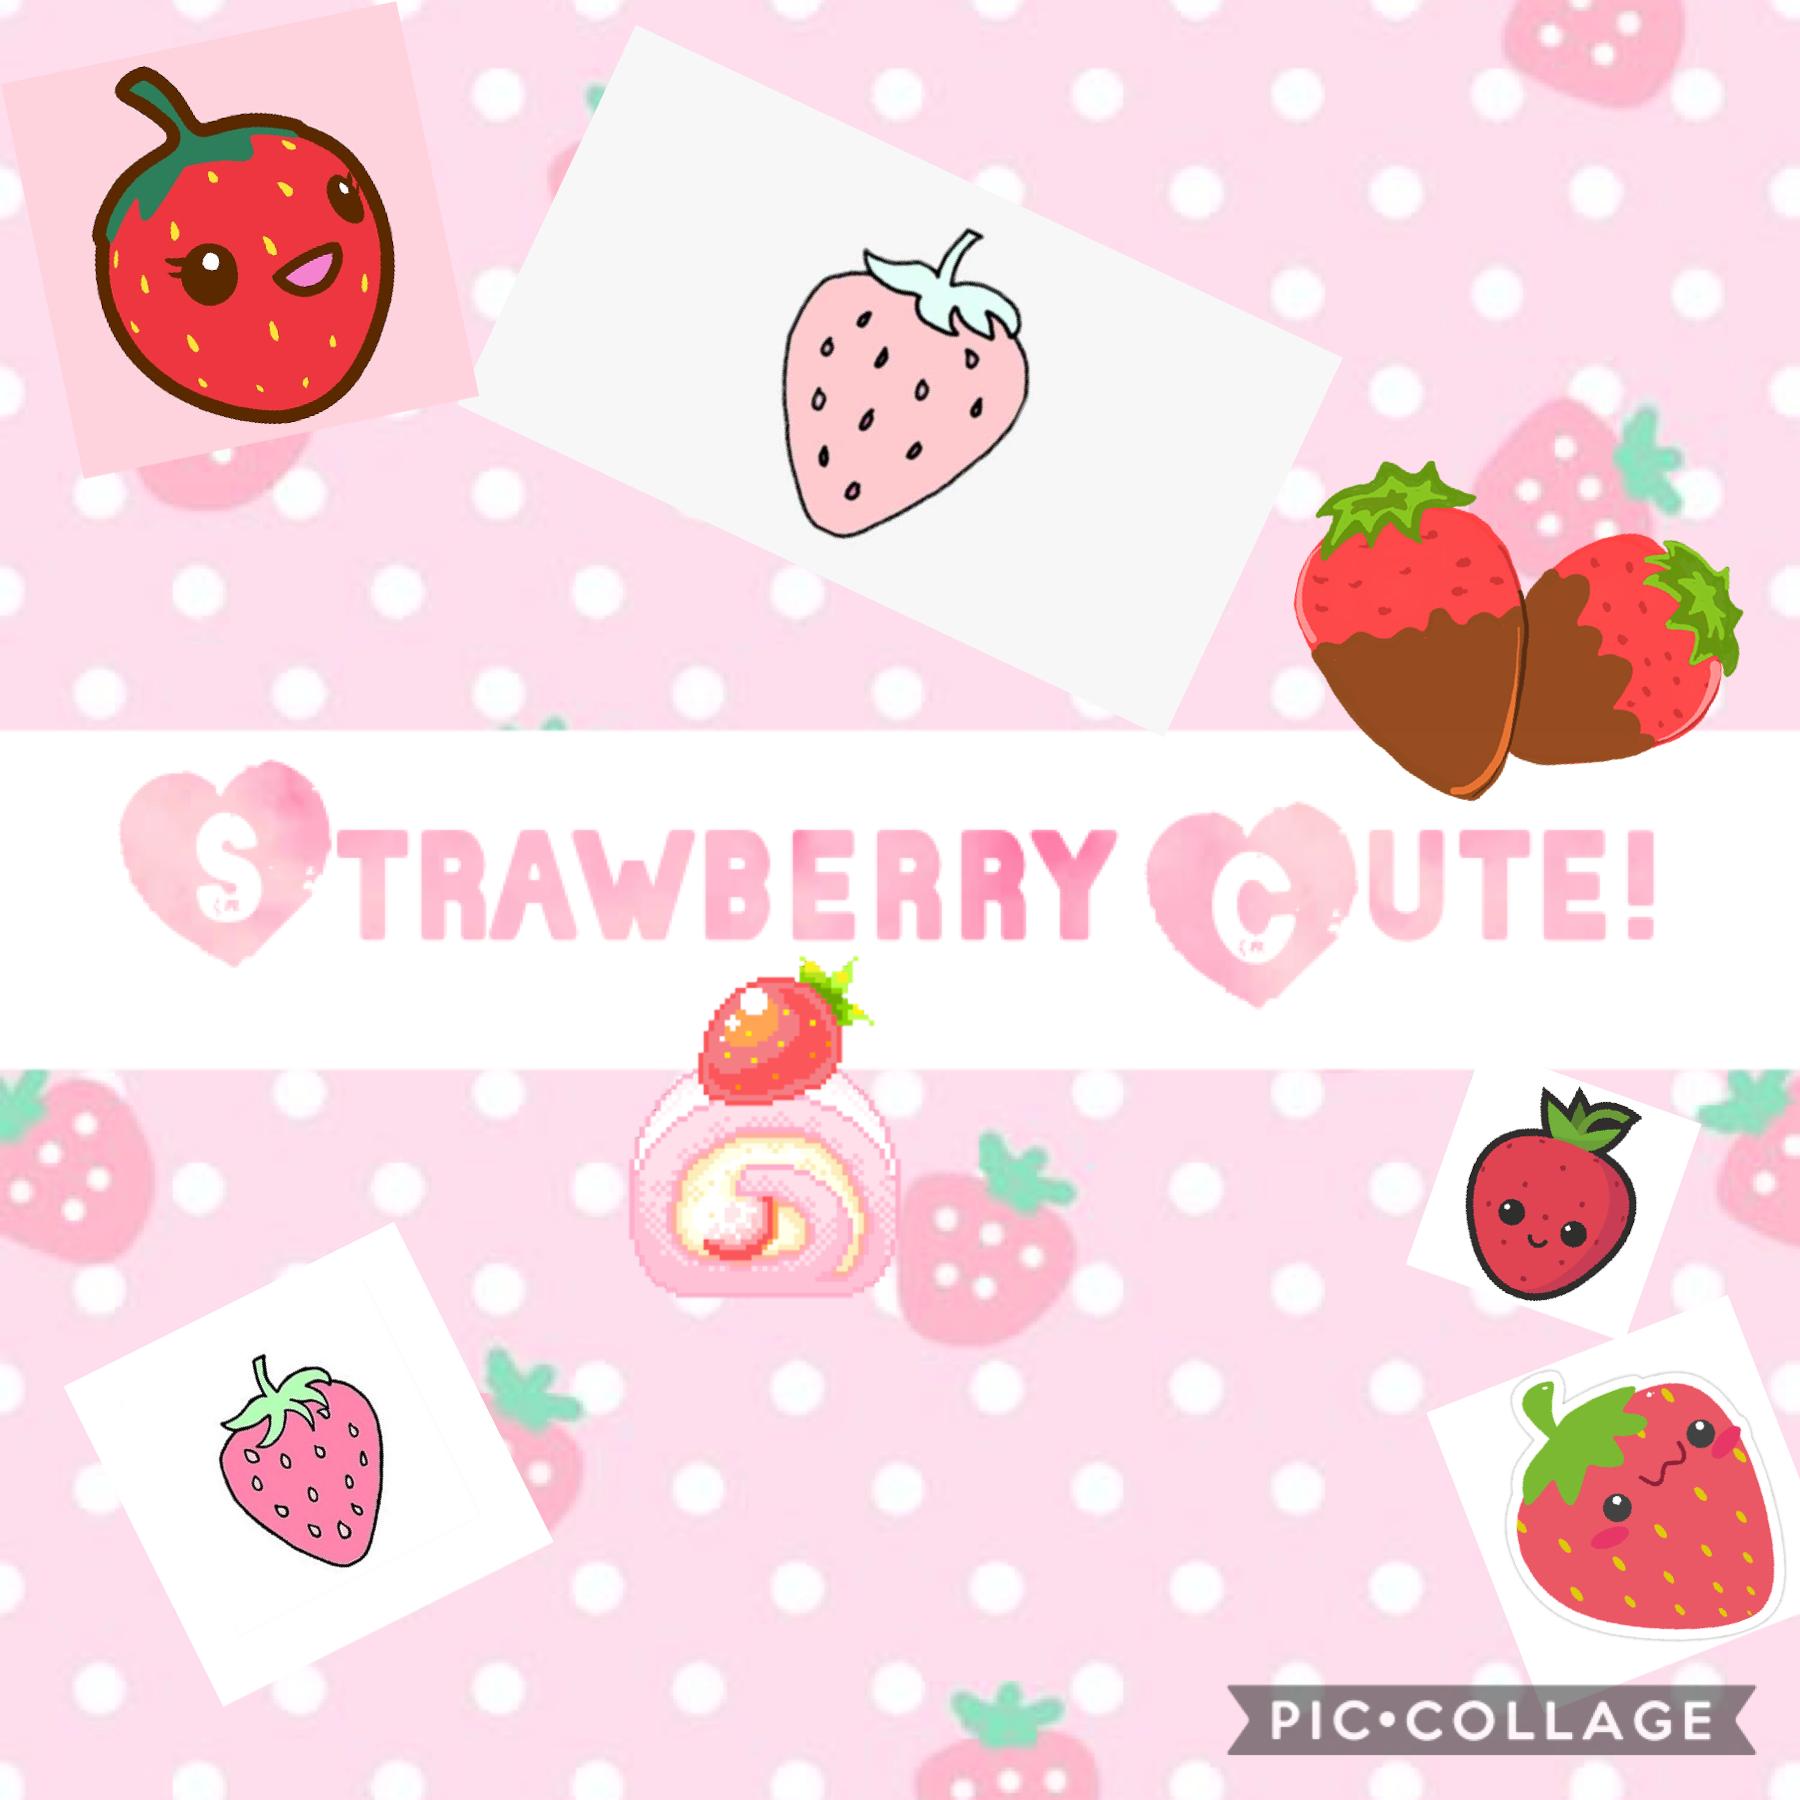 First post of the day! Strawberry Cute!